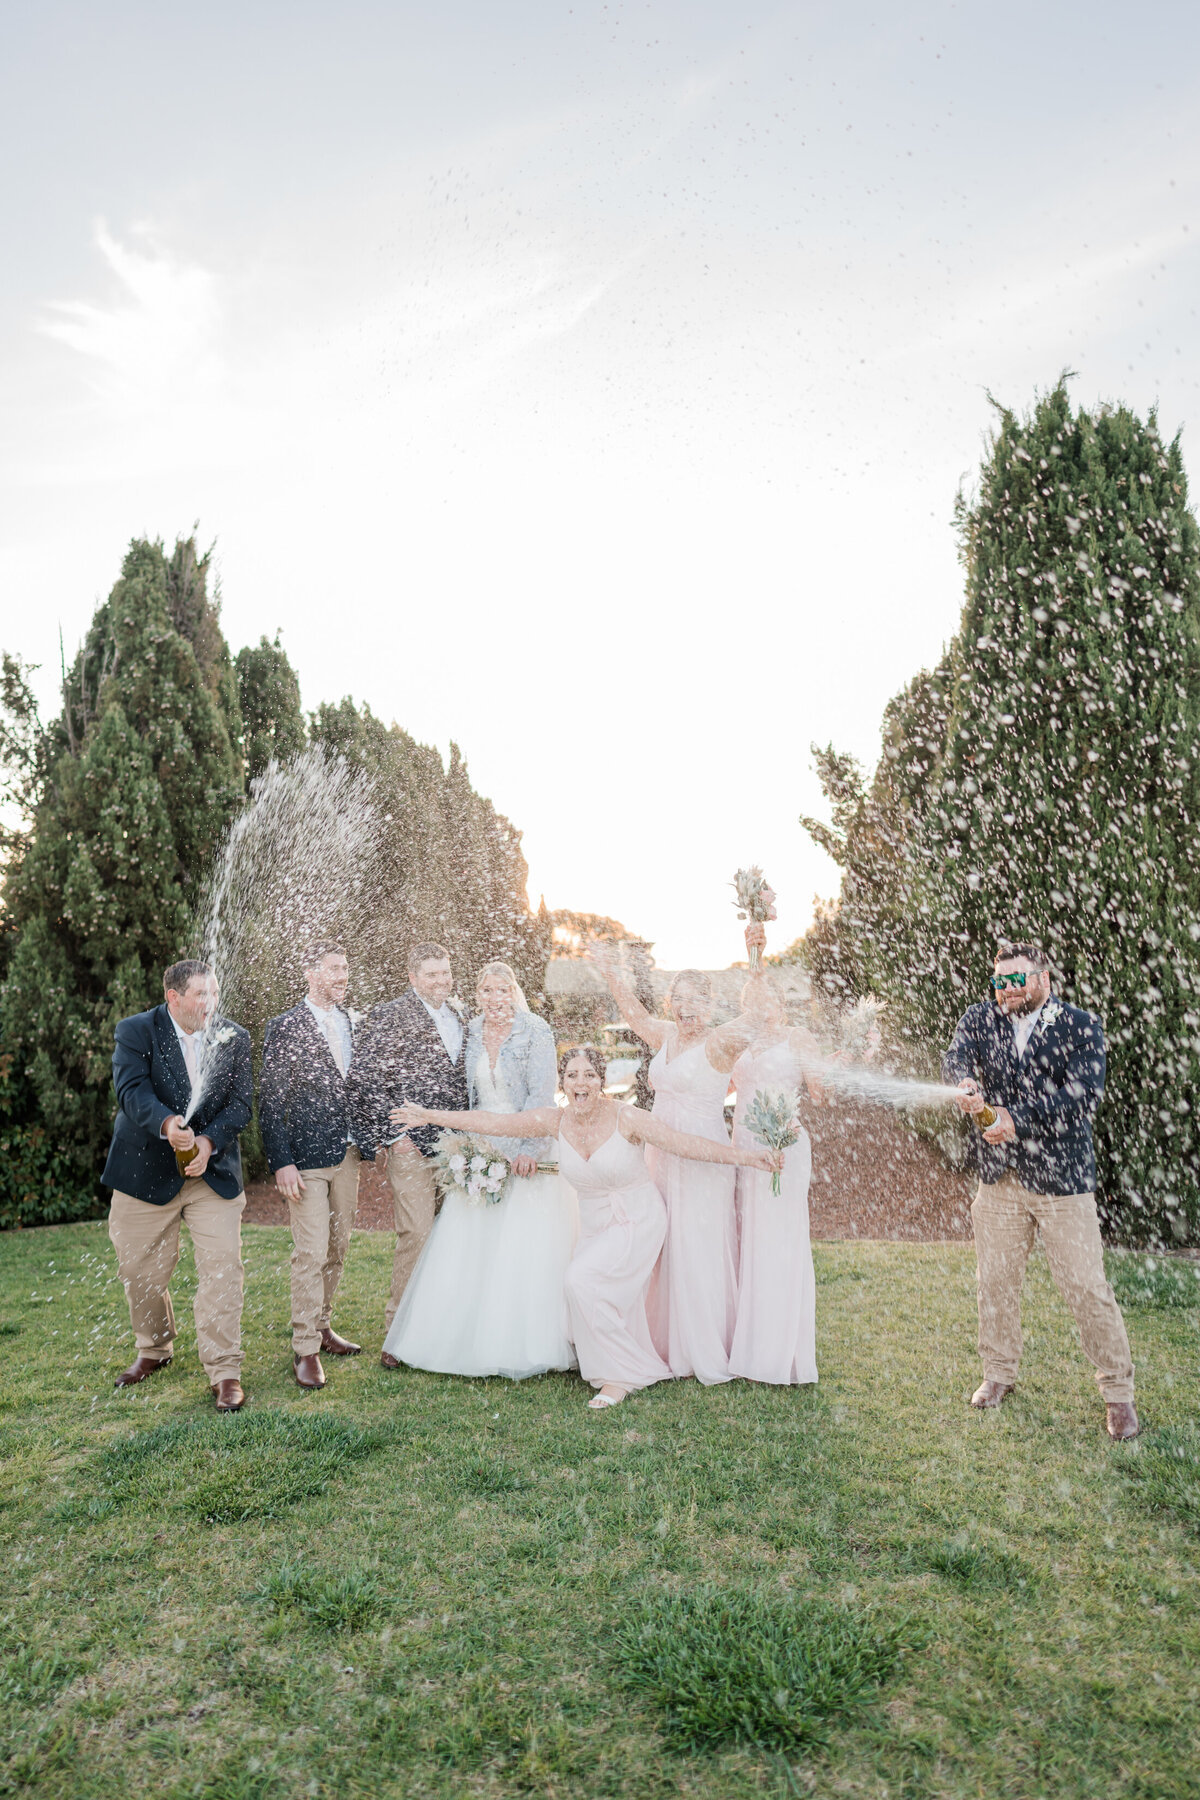 Bridal party in winery vineyards